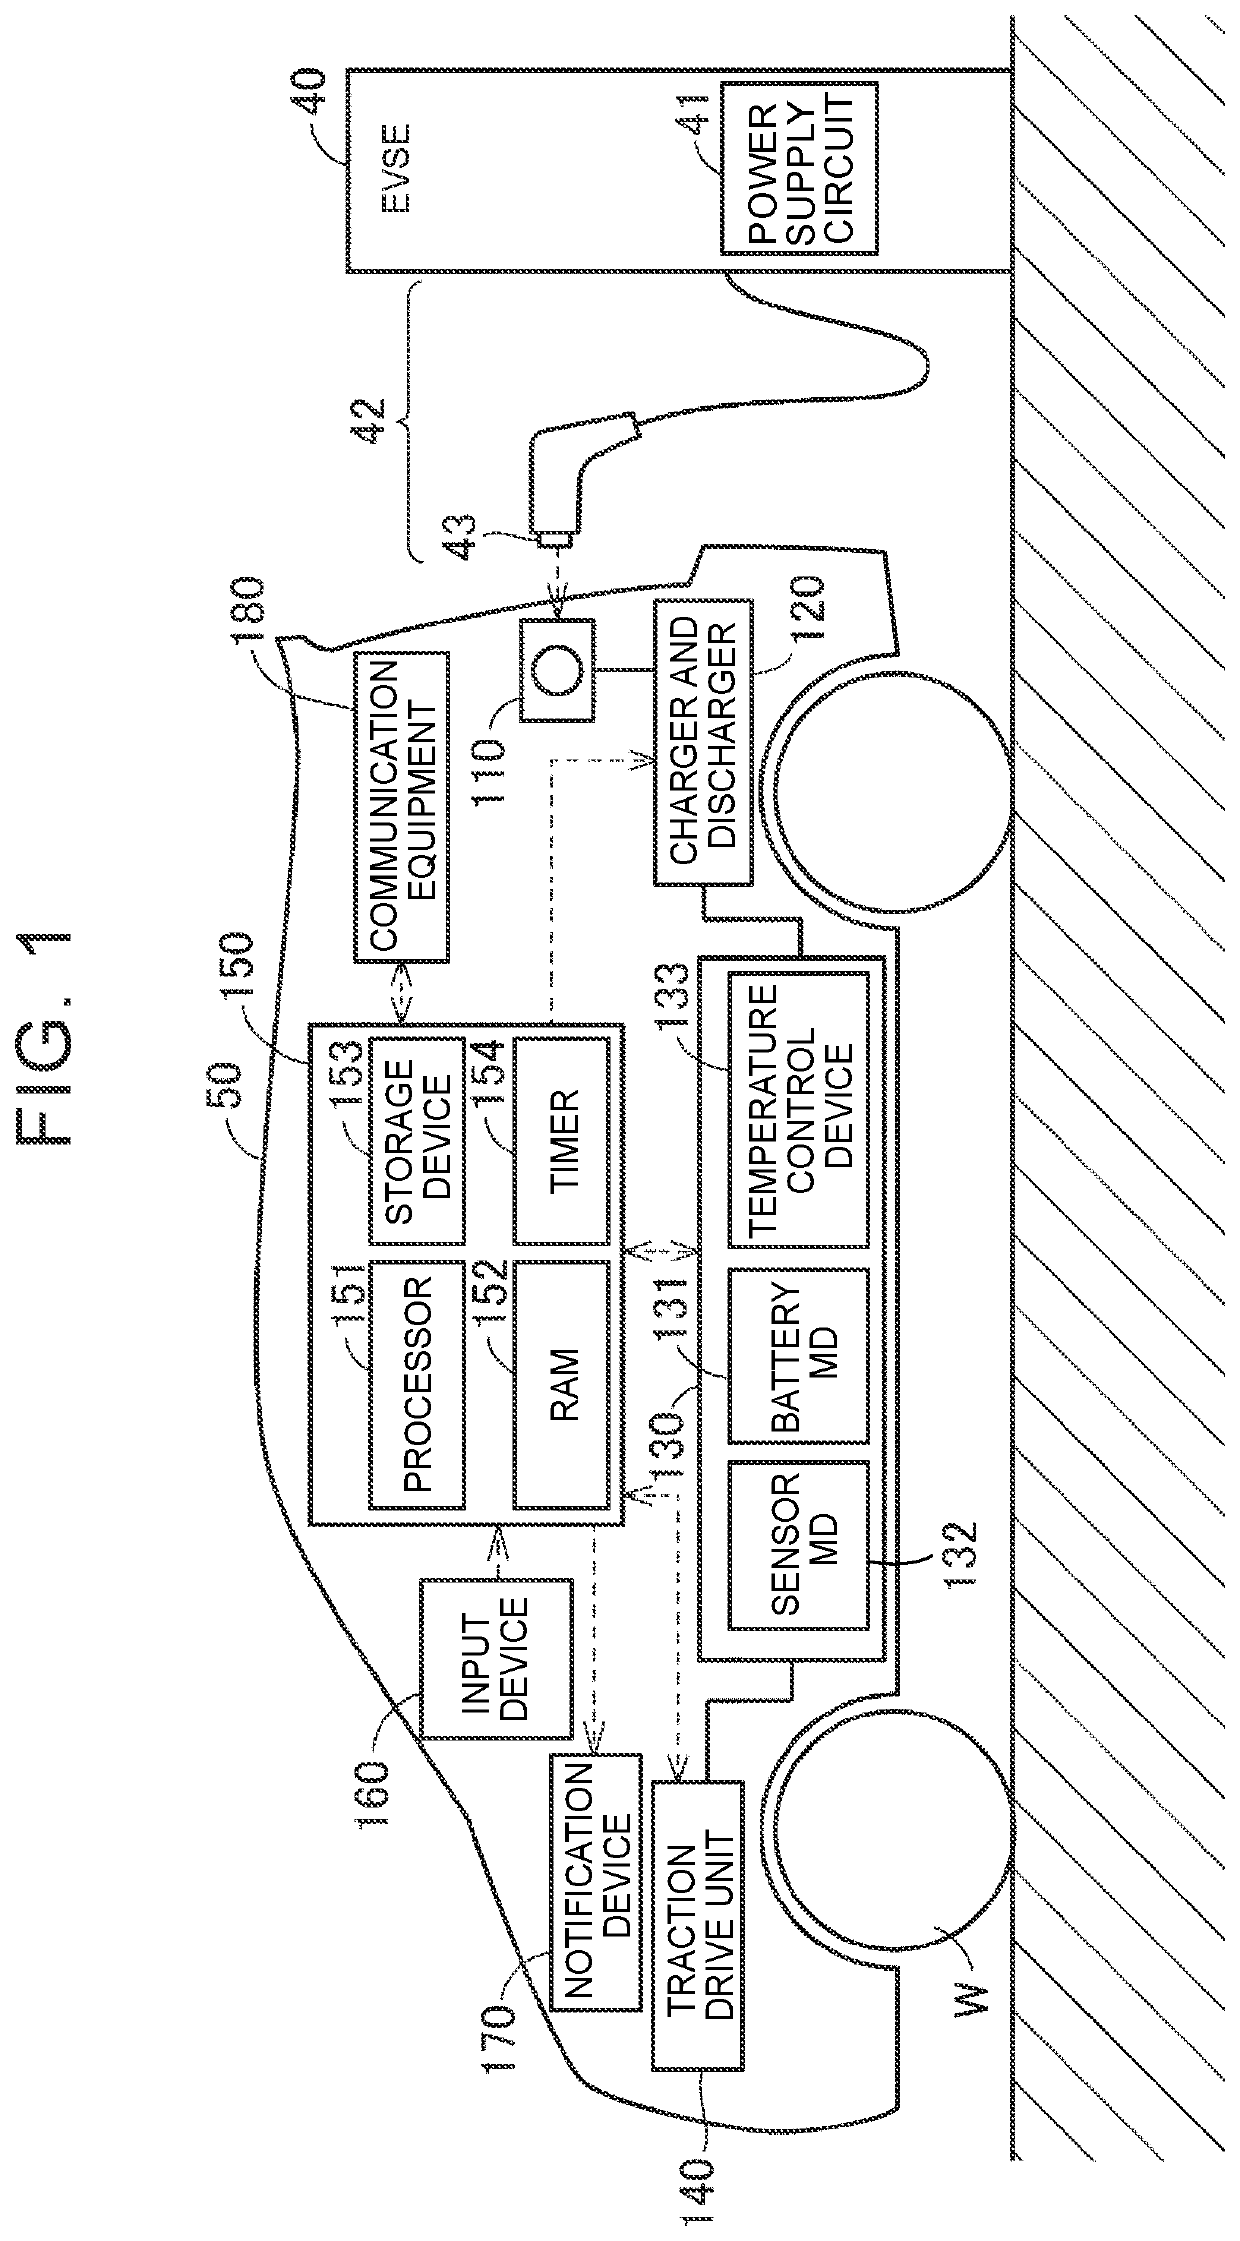 Control system and energy management method